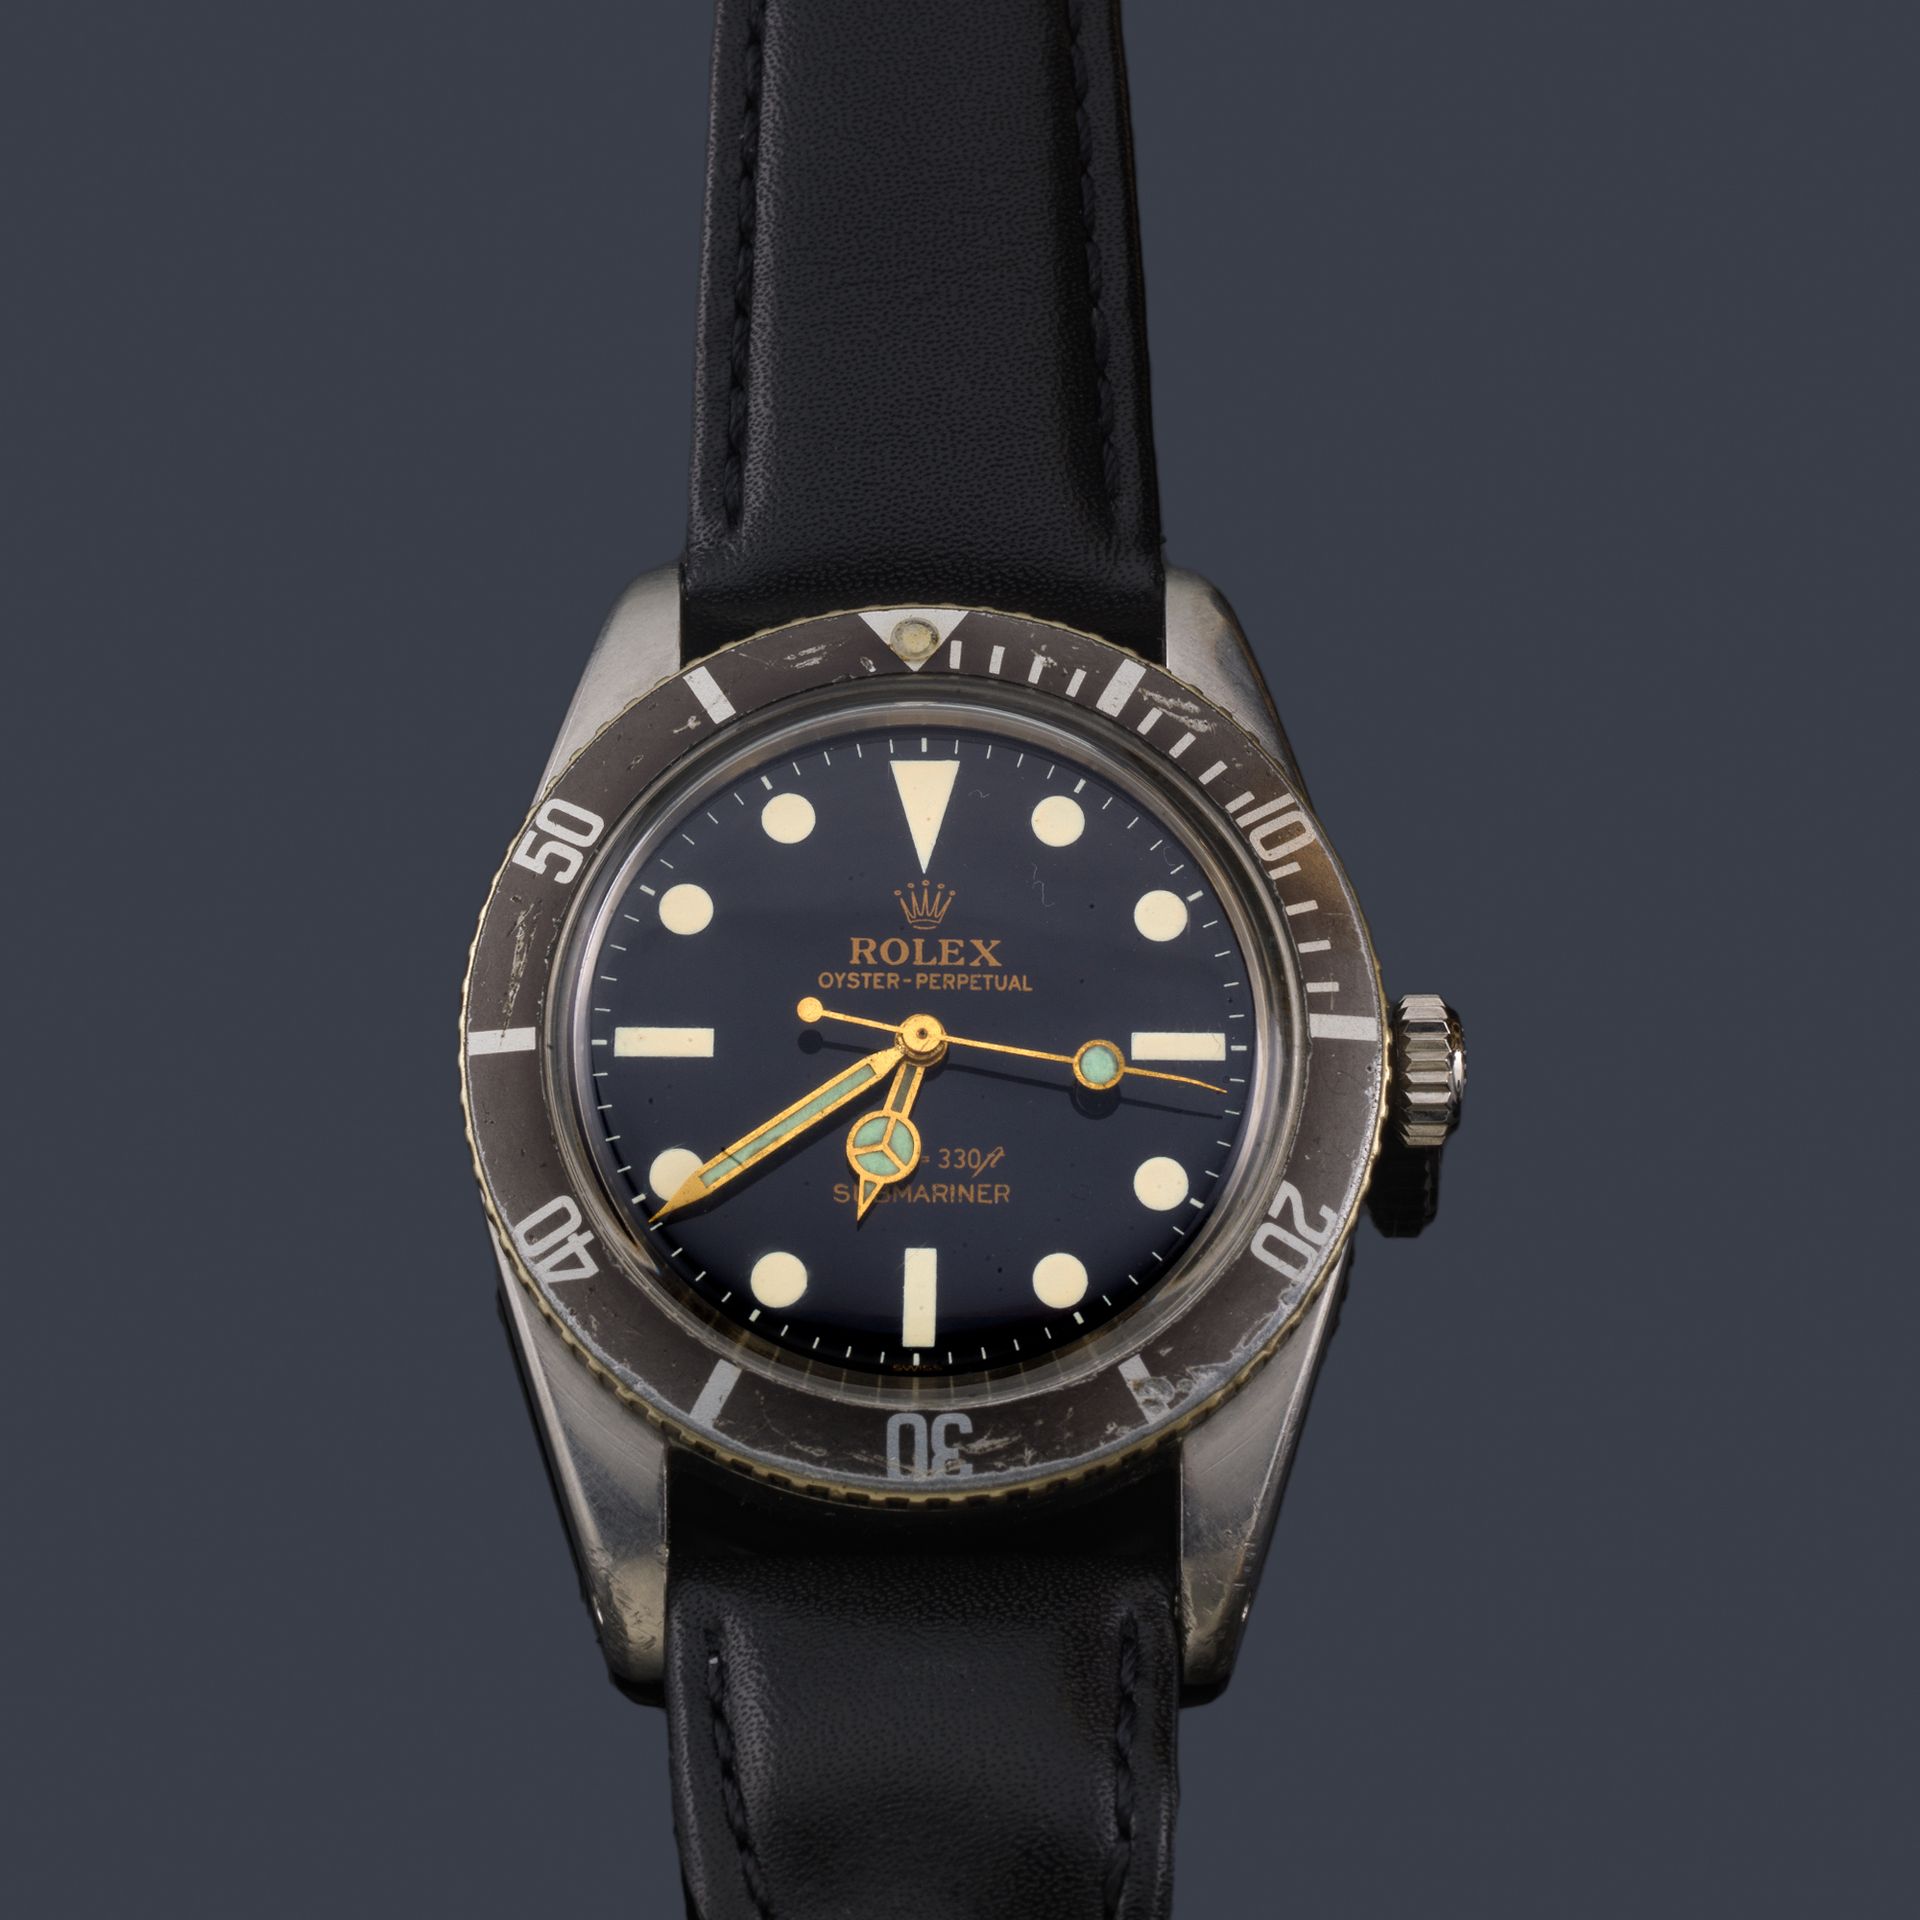 ROLEX Small Crown Submariner "James Bond" ref. 6536/0 Men's Oyster Perpetual wit&hellip;